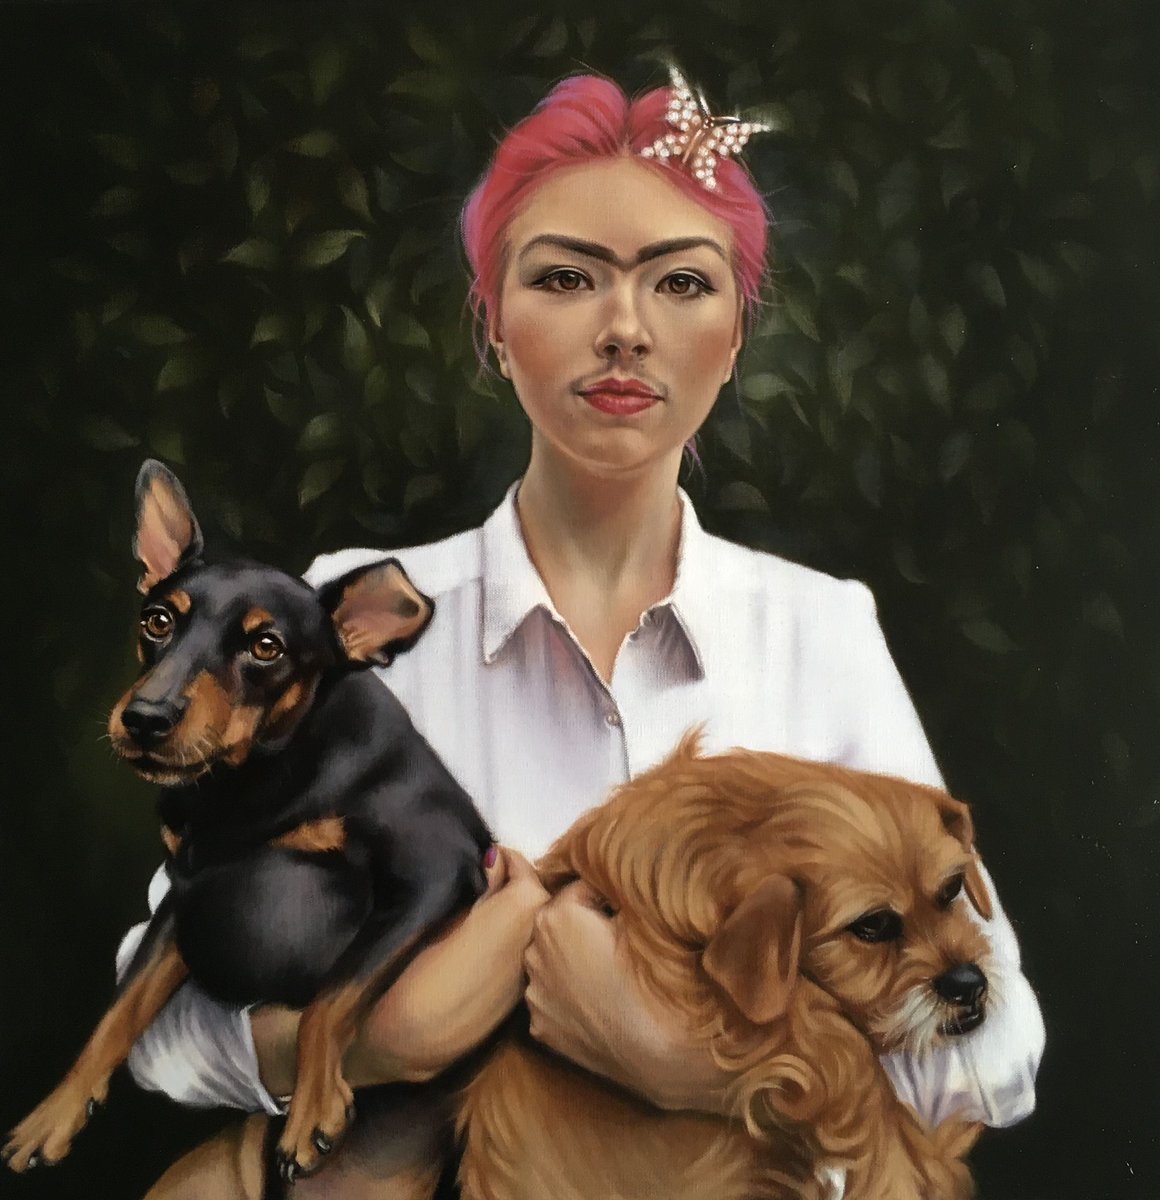 Apparently it’s National Pet Day 🐾 Here’s my 2 precious pets : Harry & Daisy being held by my daughter disguised as Frida Kahlo (don’t ask!) 🐕‍🦺🦮 #NationalPetDay2024 #dogs #FRIENDS4EVER #rescuedog #miniaturepinscher #oilpainting #portraiture